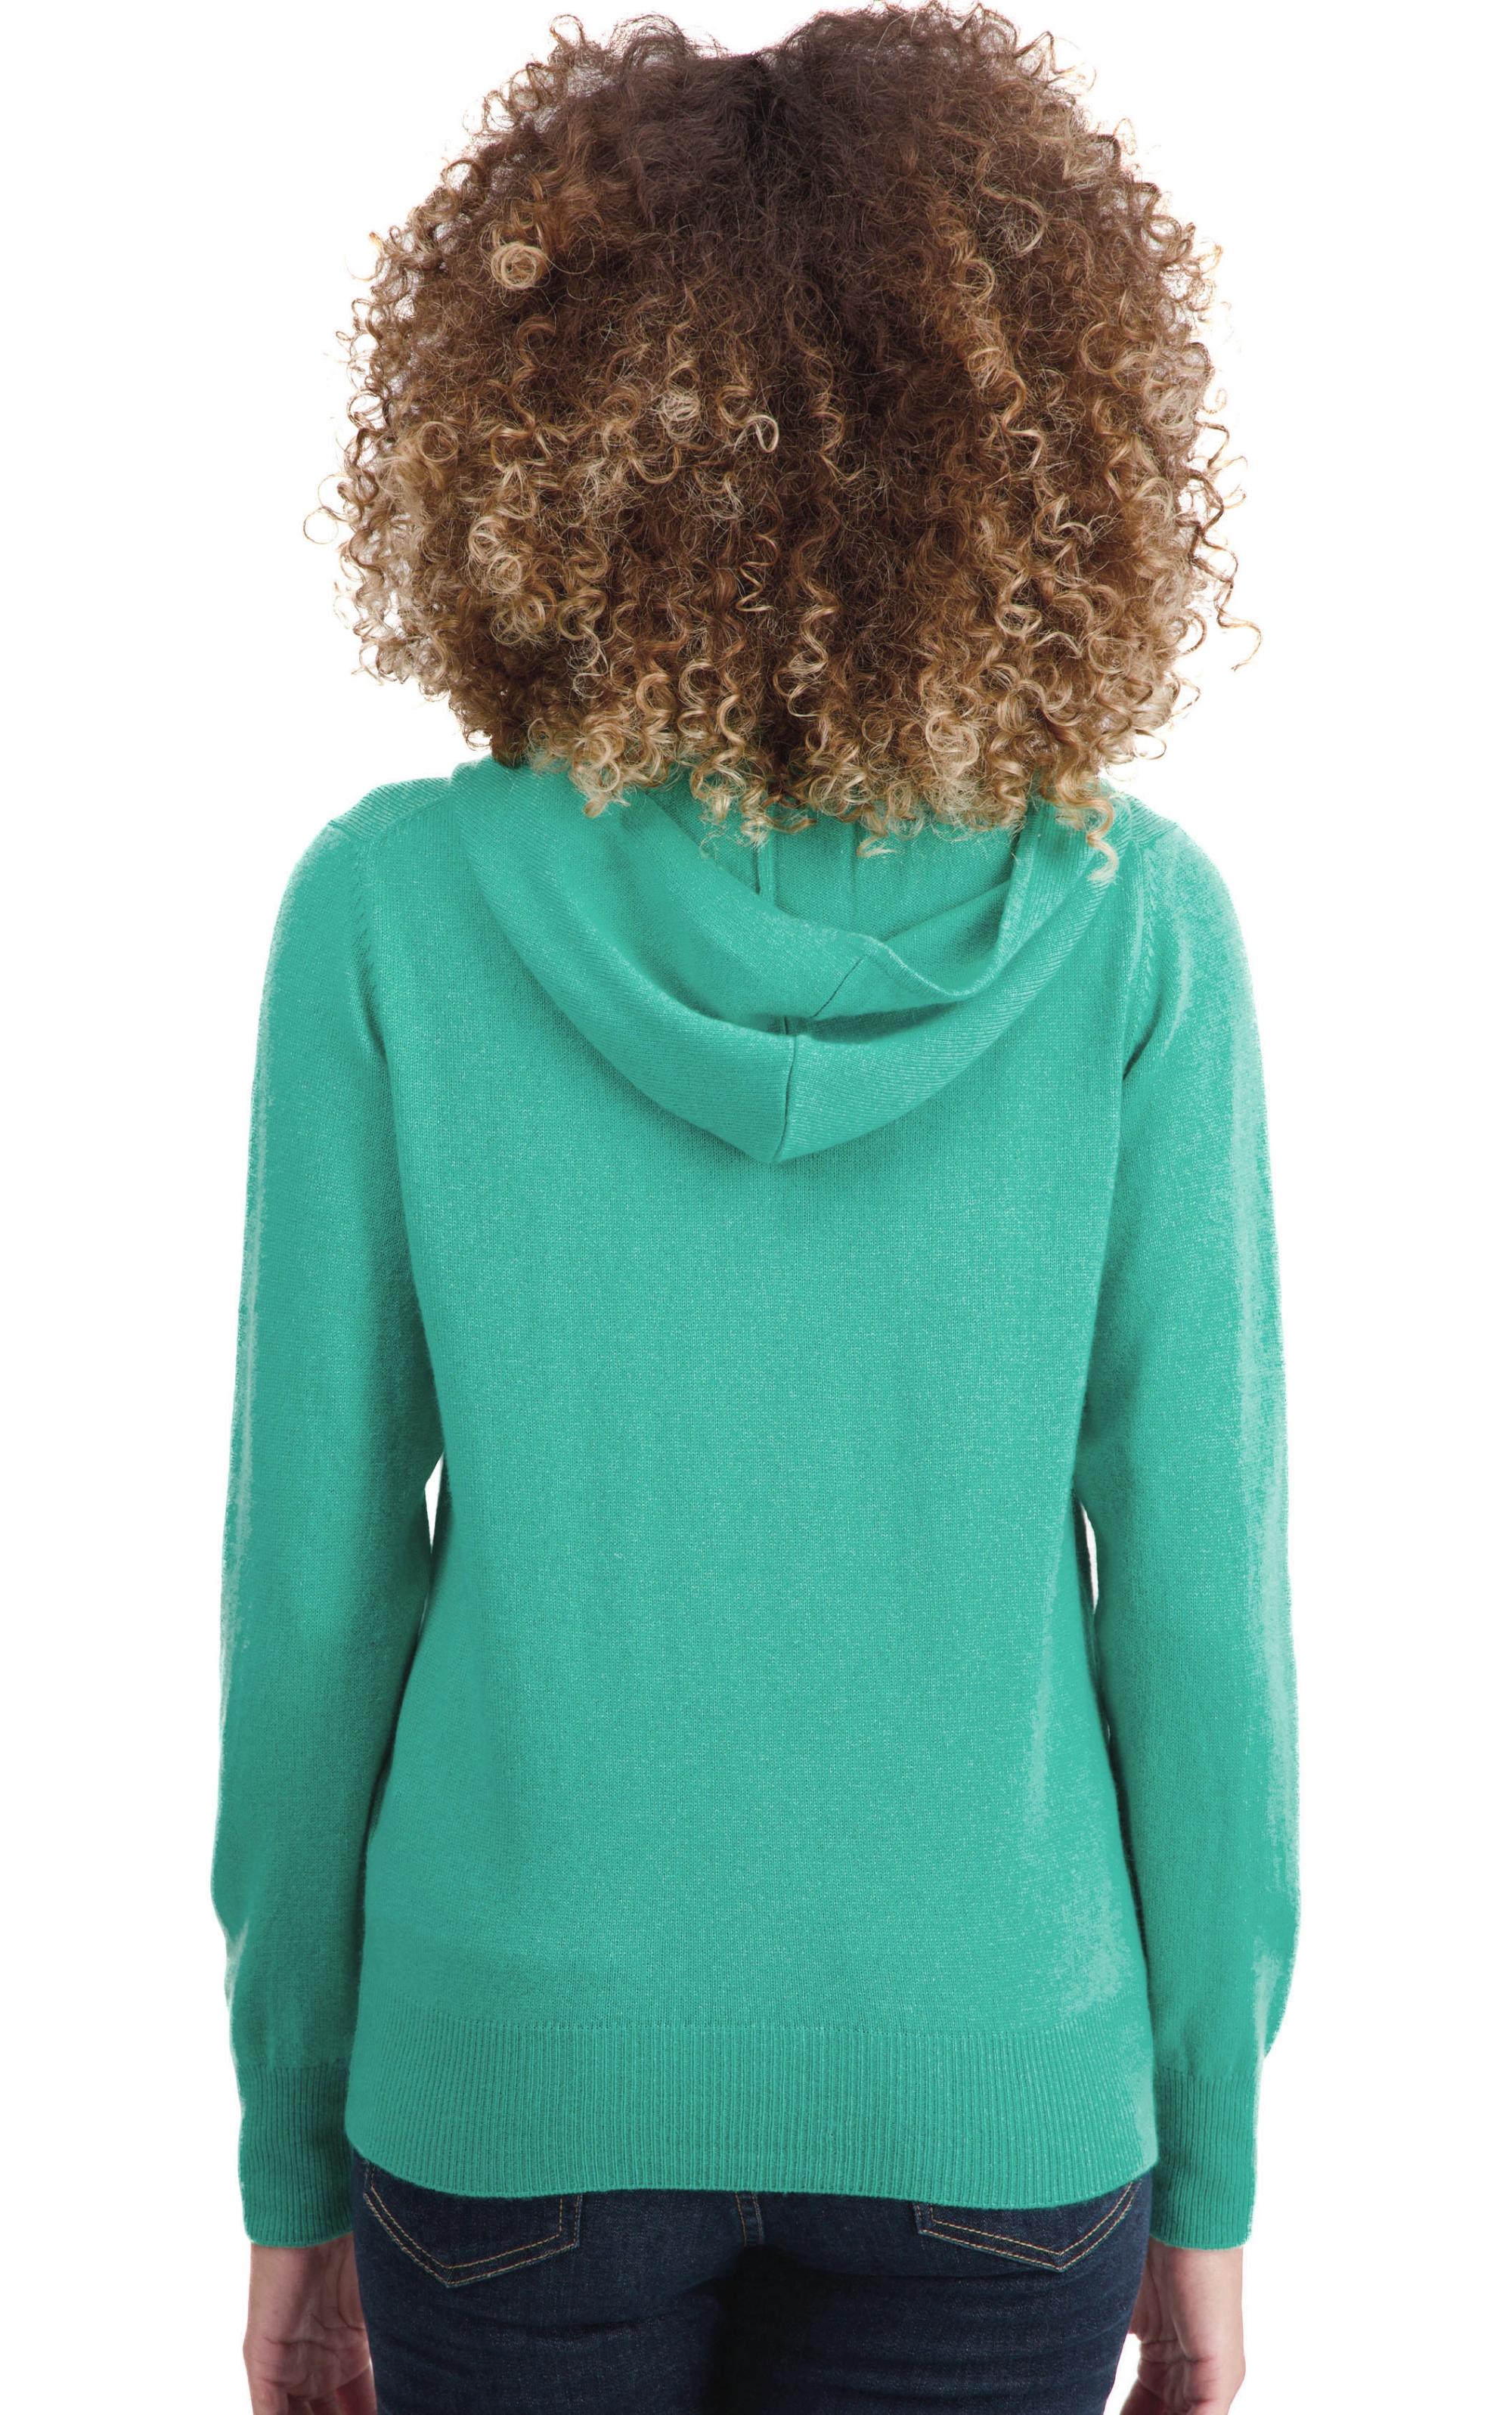 Cashmere ladies basic sweaters at low prices tina first nile m